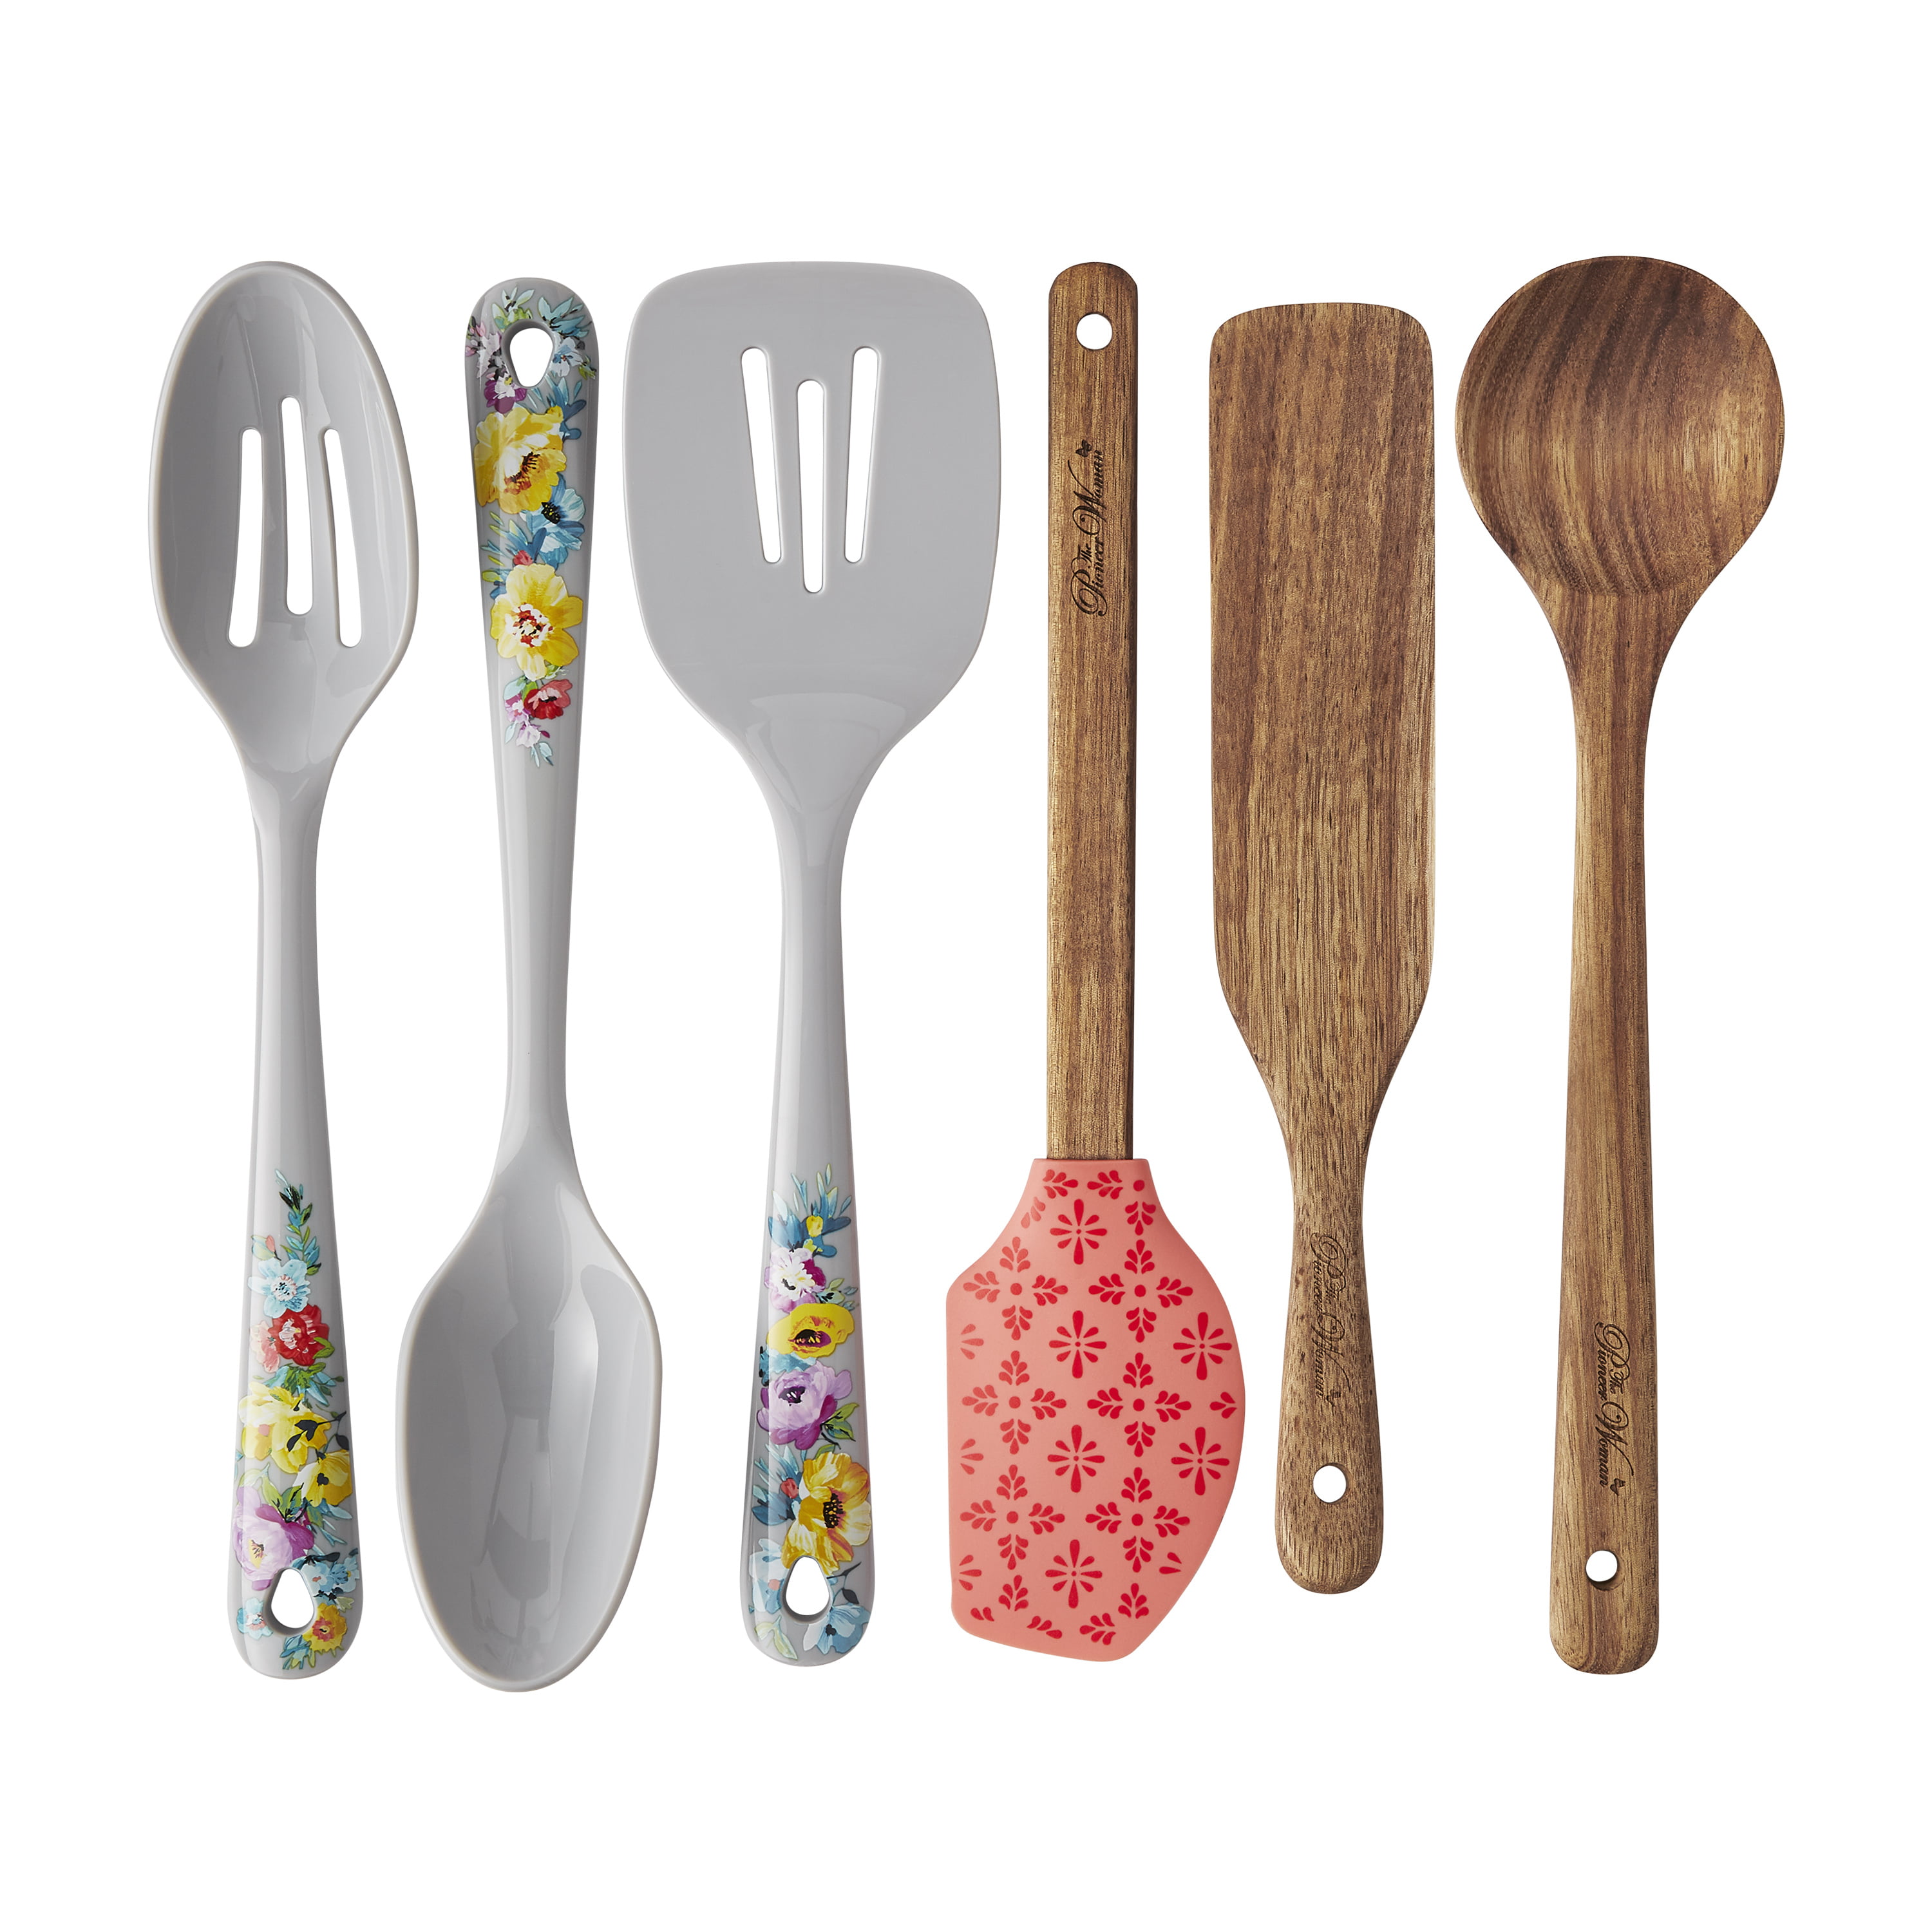 Lovelies For Your Kitchen From The Pioneer Woman · Entertaining, Get It